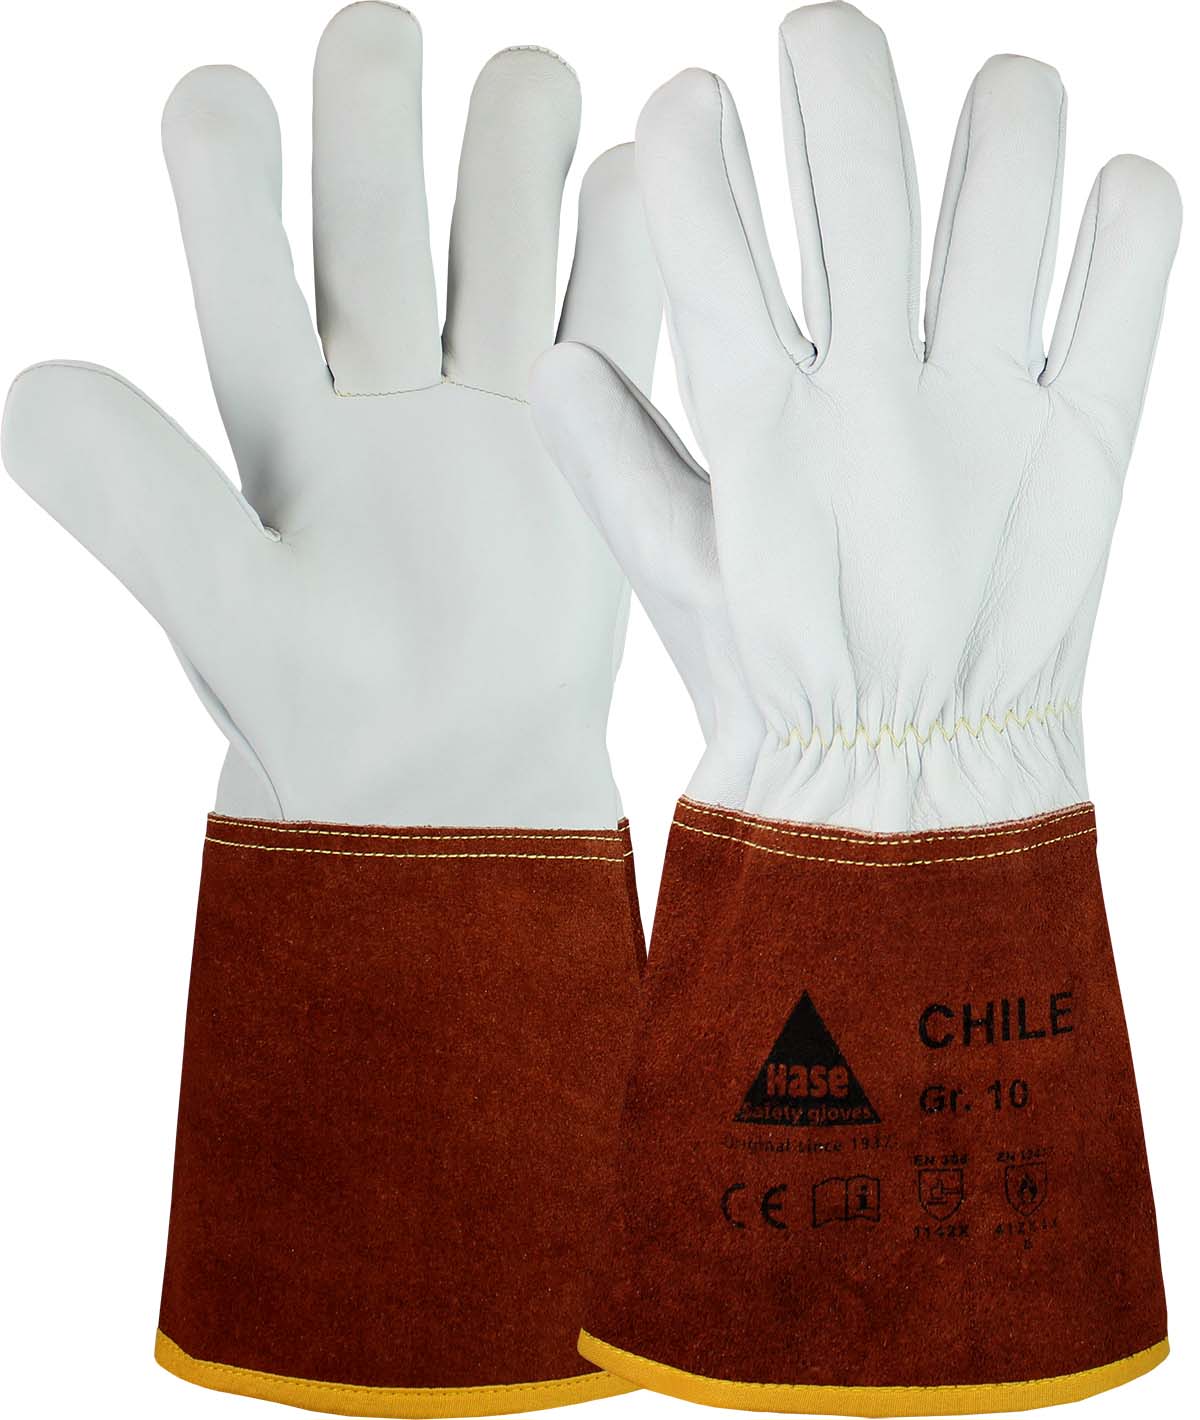 HASE Schweißerhandschuh "Chile" Nr. 403840, VPE: 10 PA